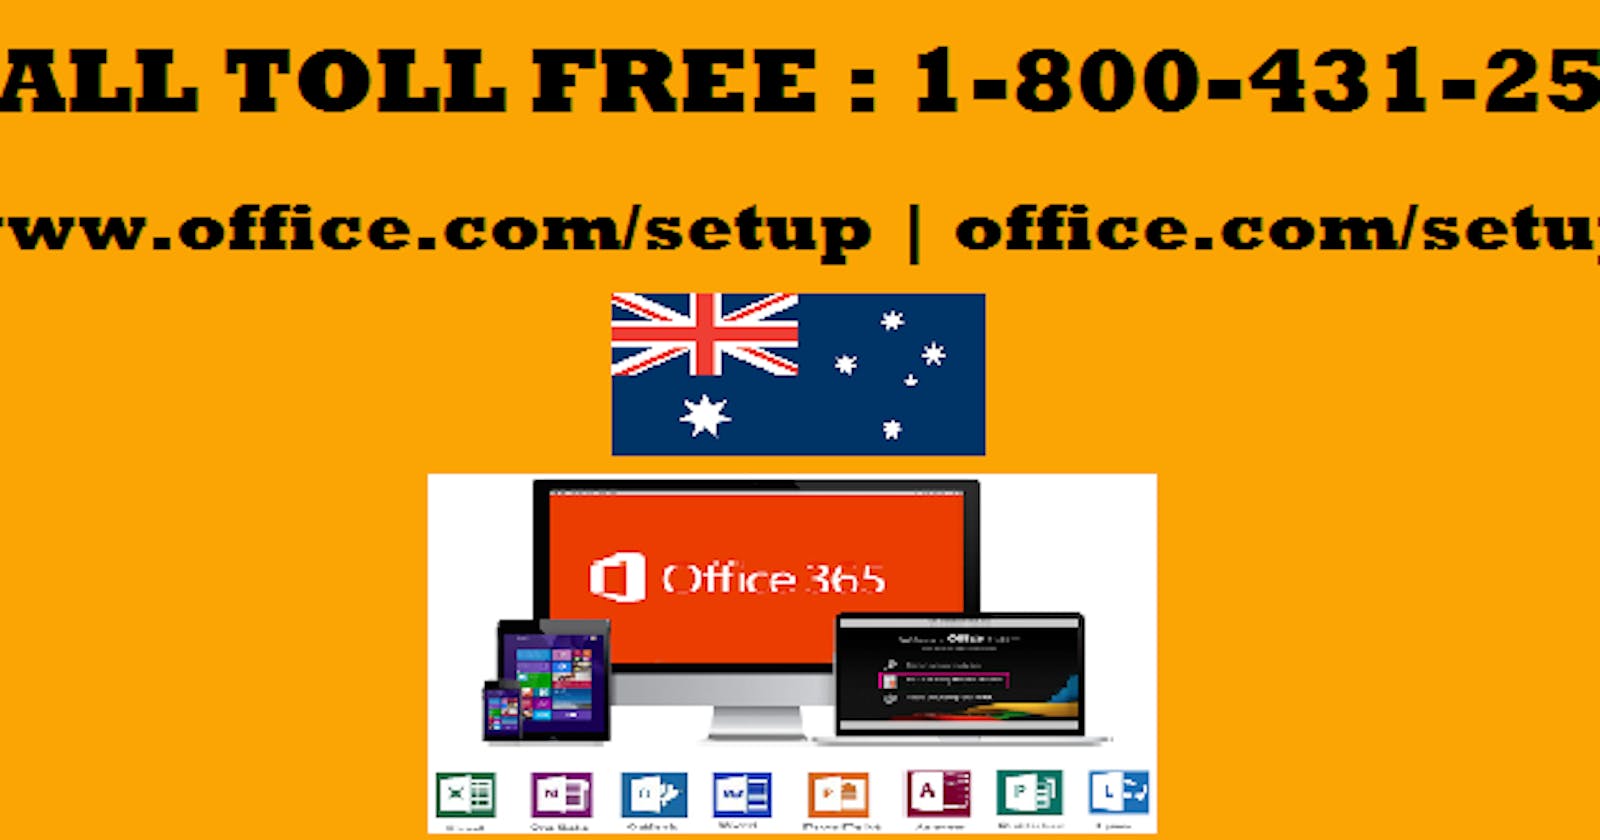 Fix Microsoft Office Setup through Toll Free Number